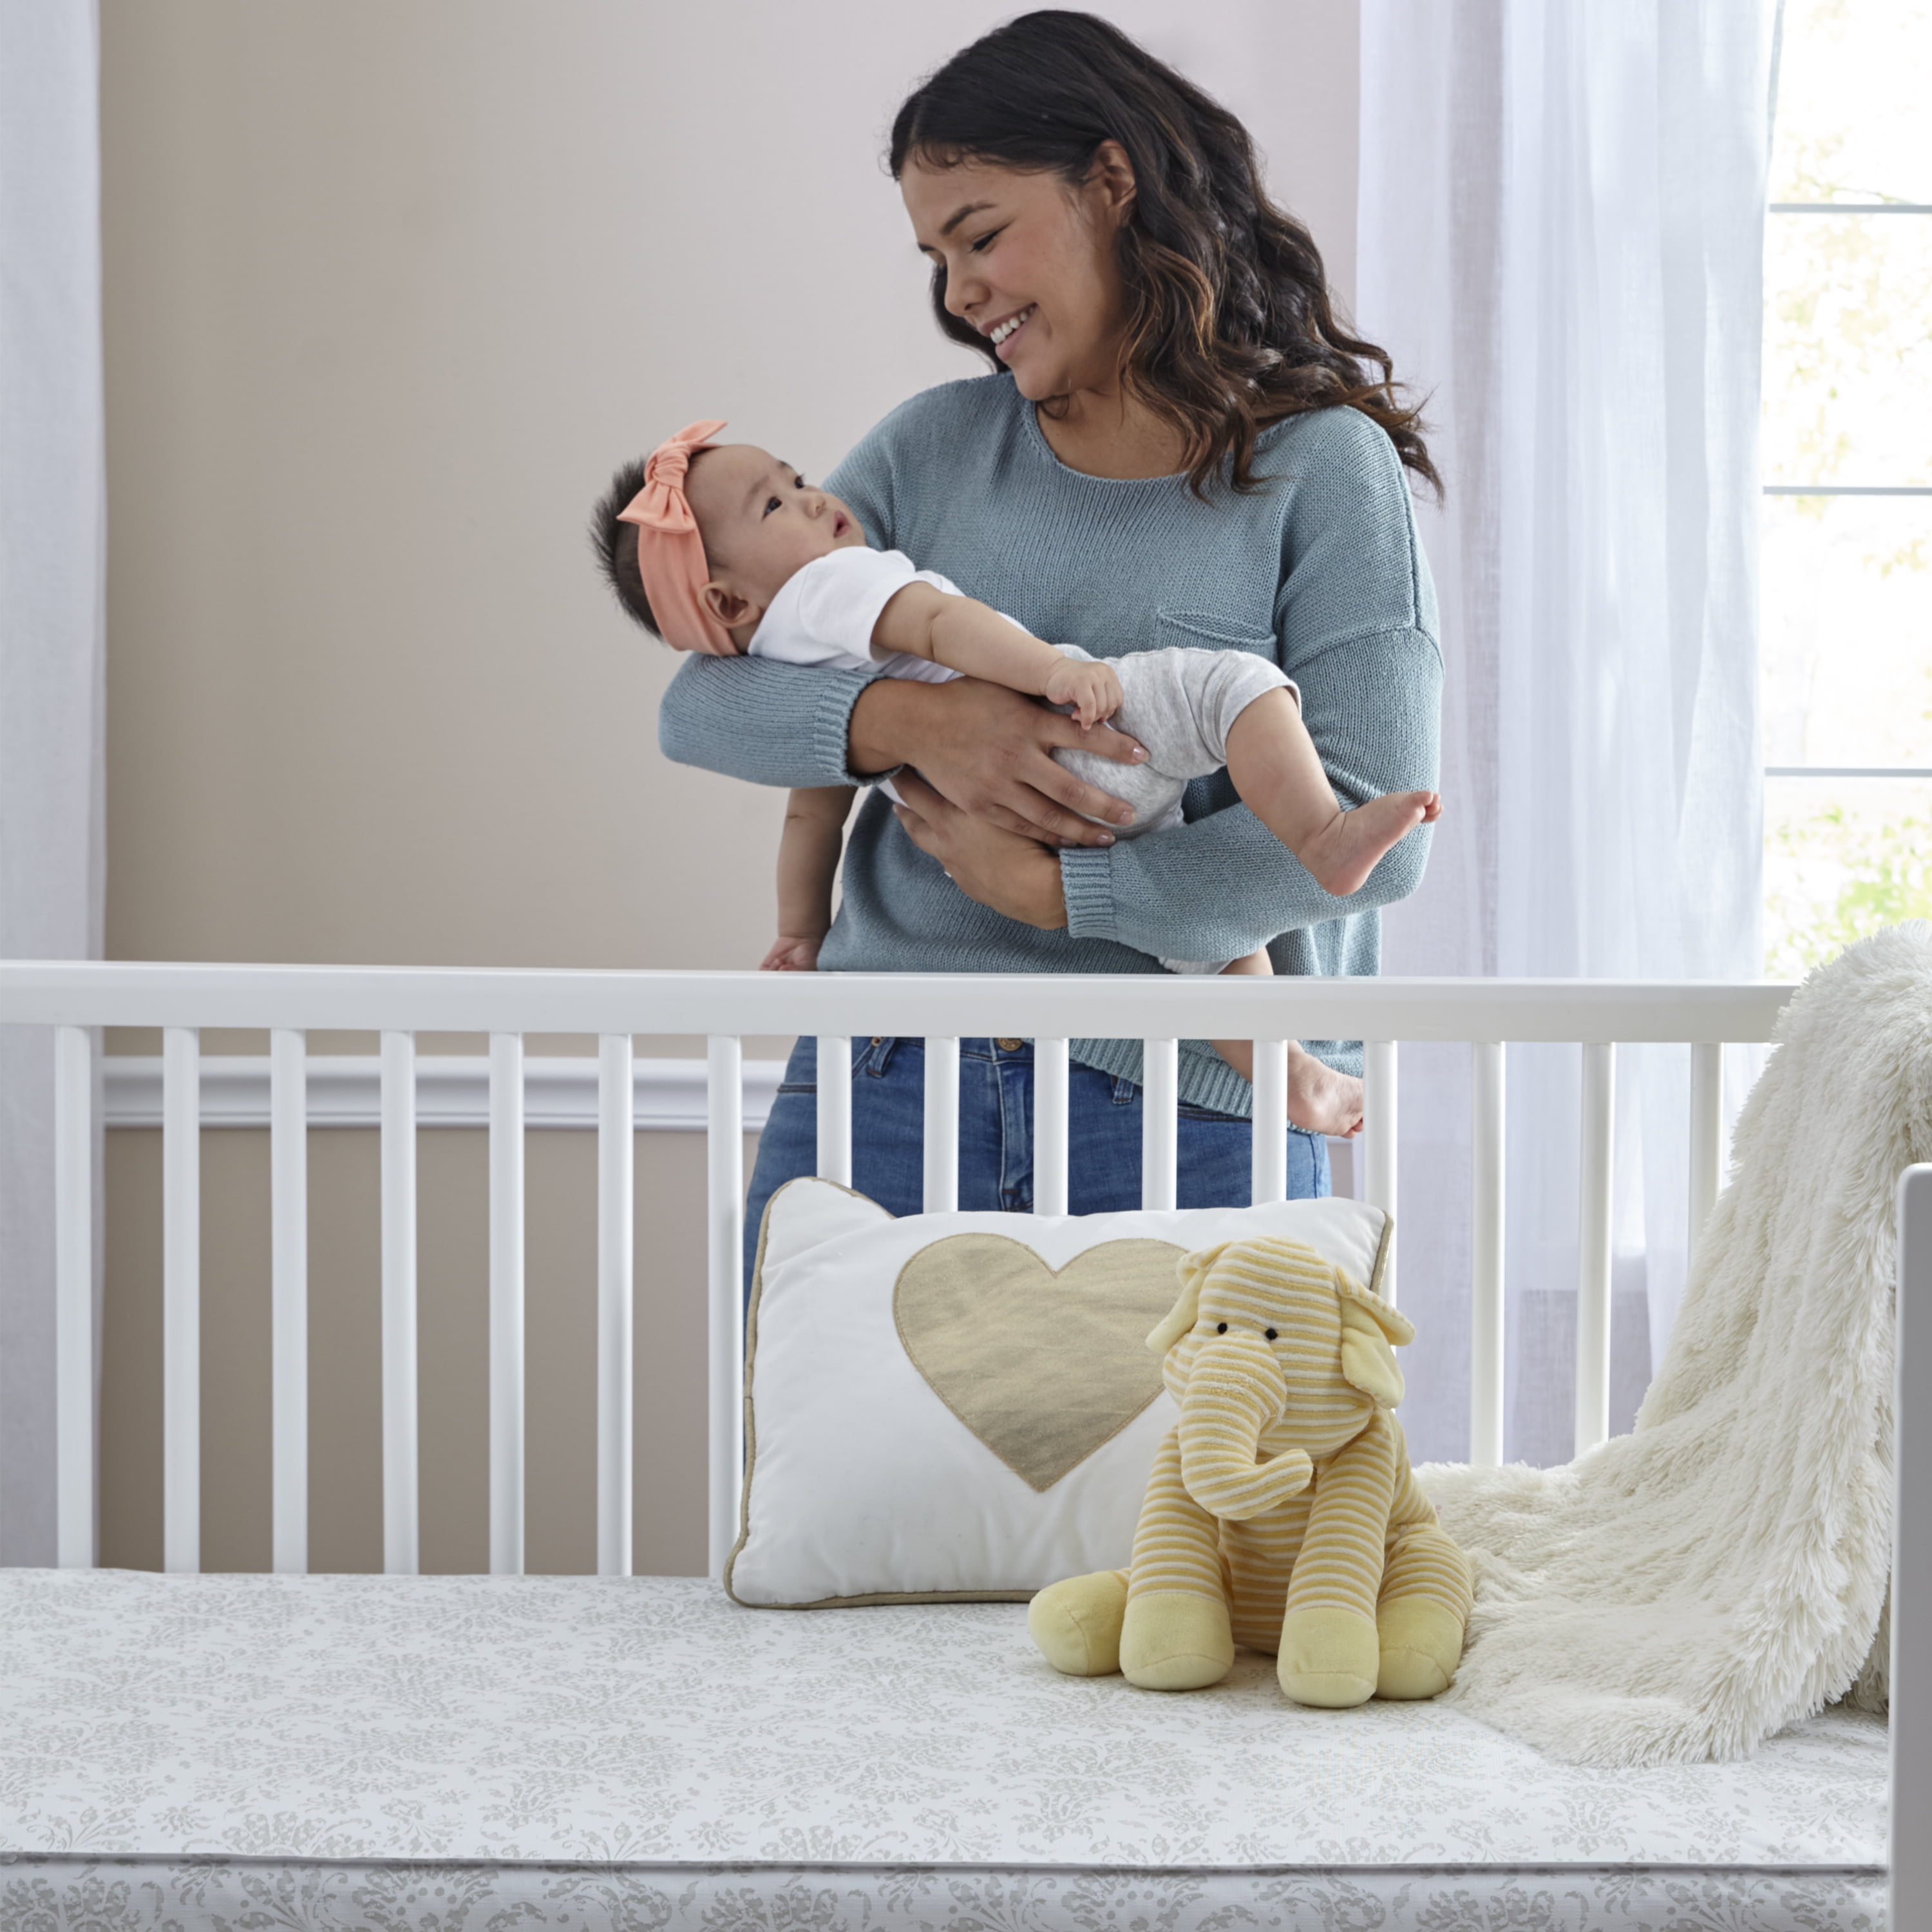 sealy ortho rest crib mattress review